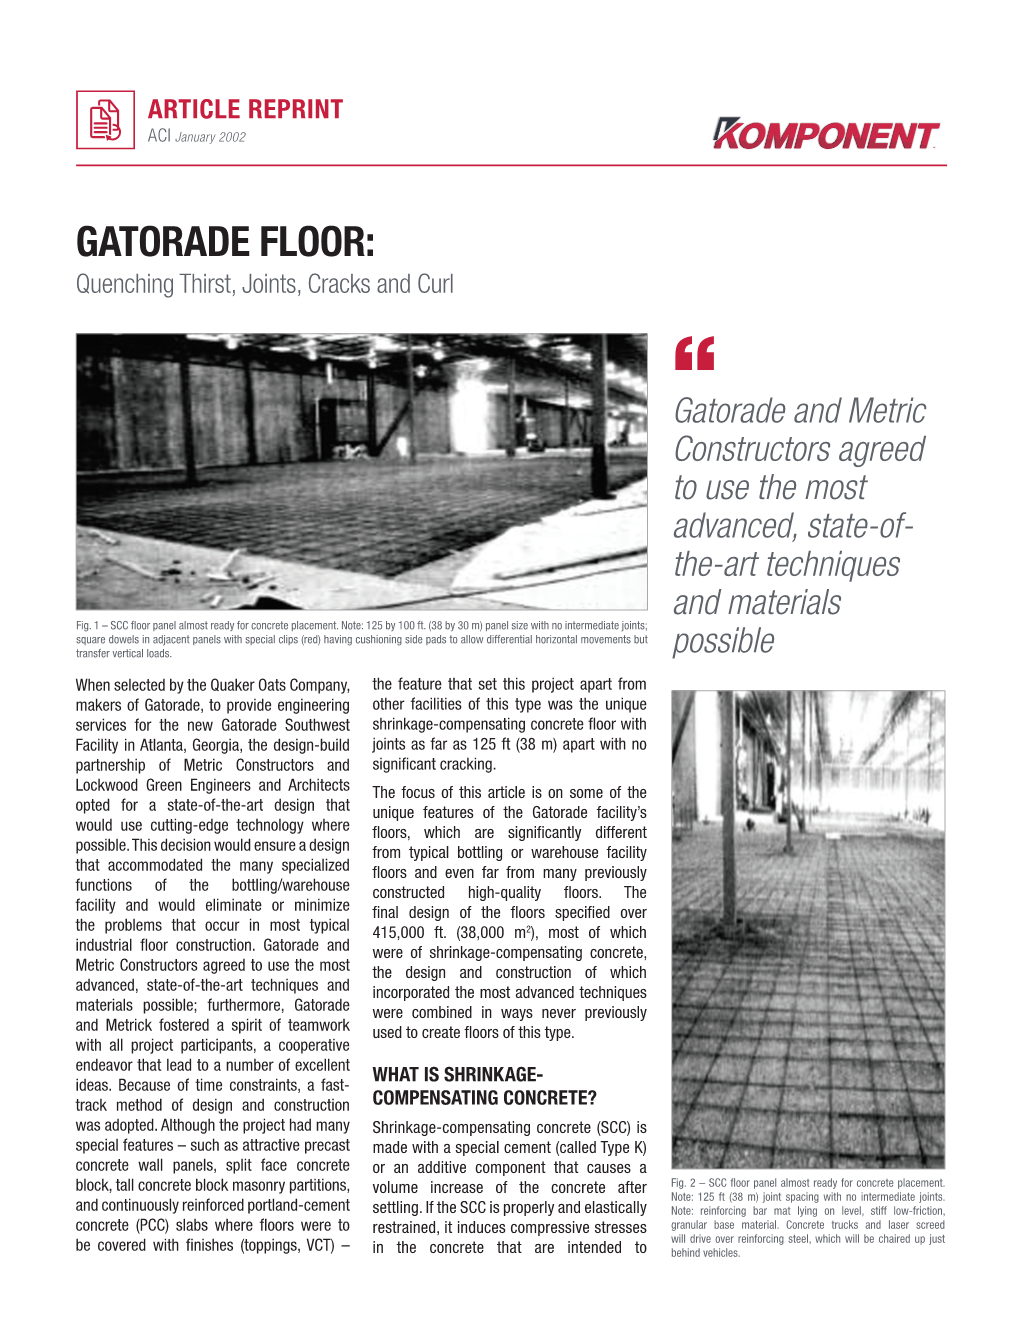 GATORADE FLOOR: Quenching Thirst, Joints, Cracks and Curl